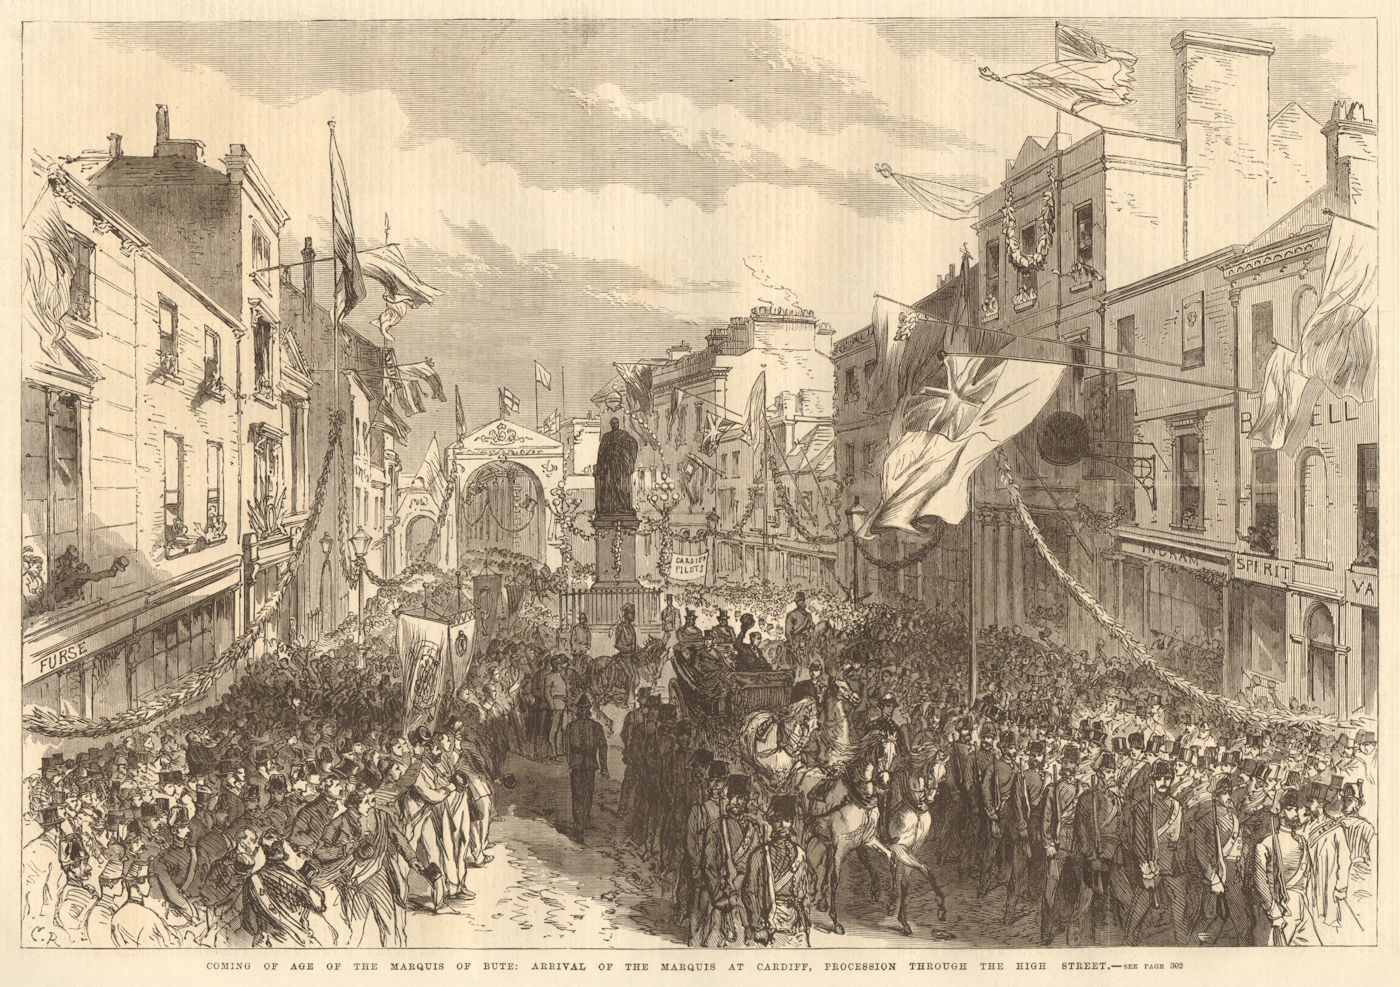 The Marquis of Bute's coming of age. Procession through Cardiff High Street 1868